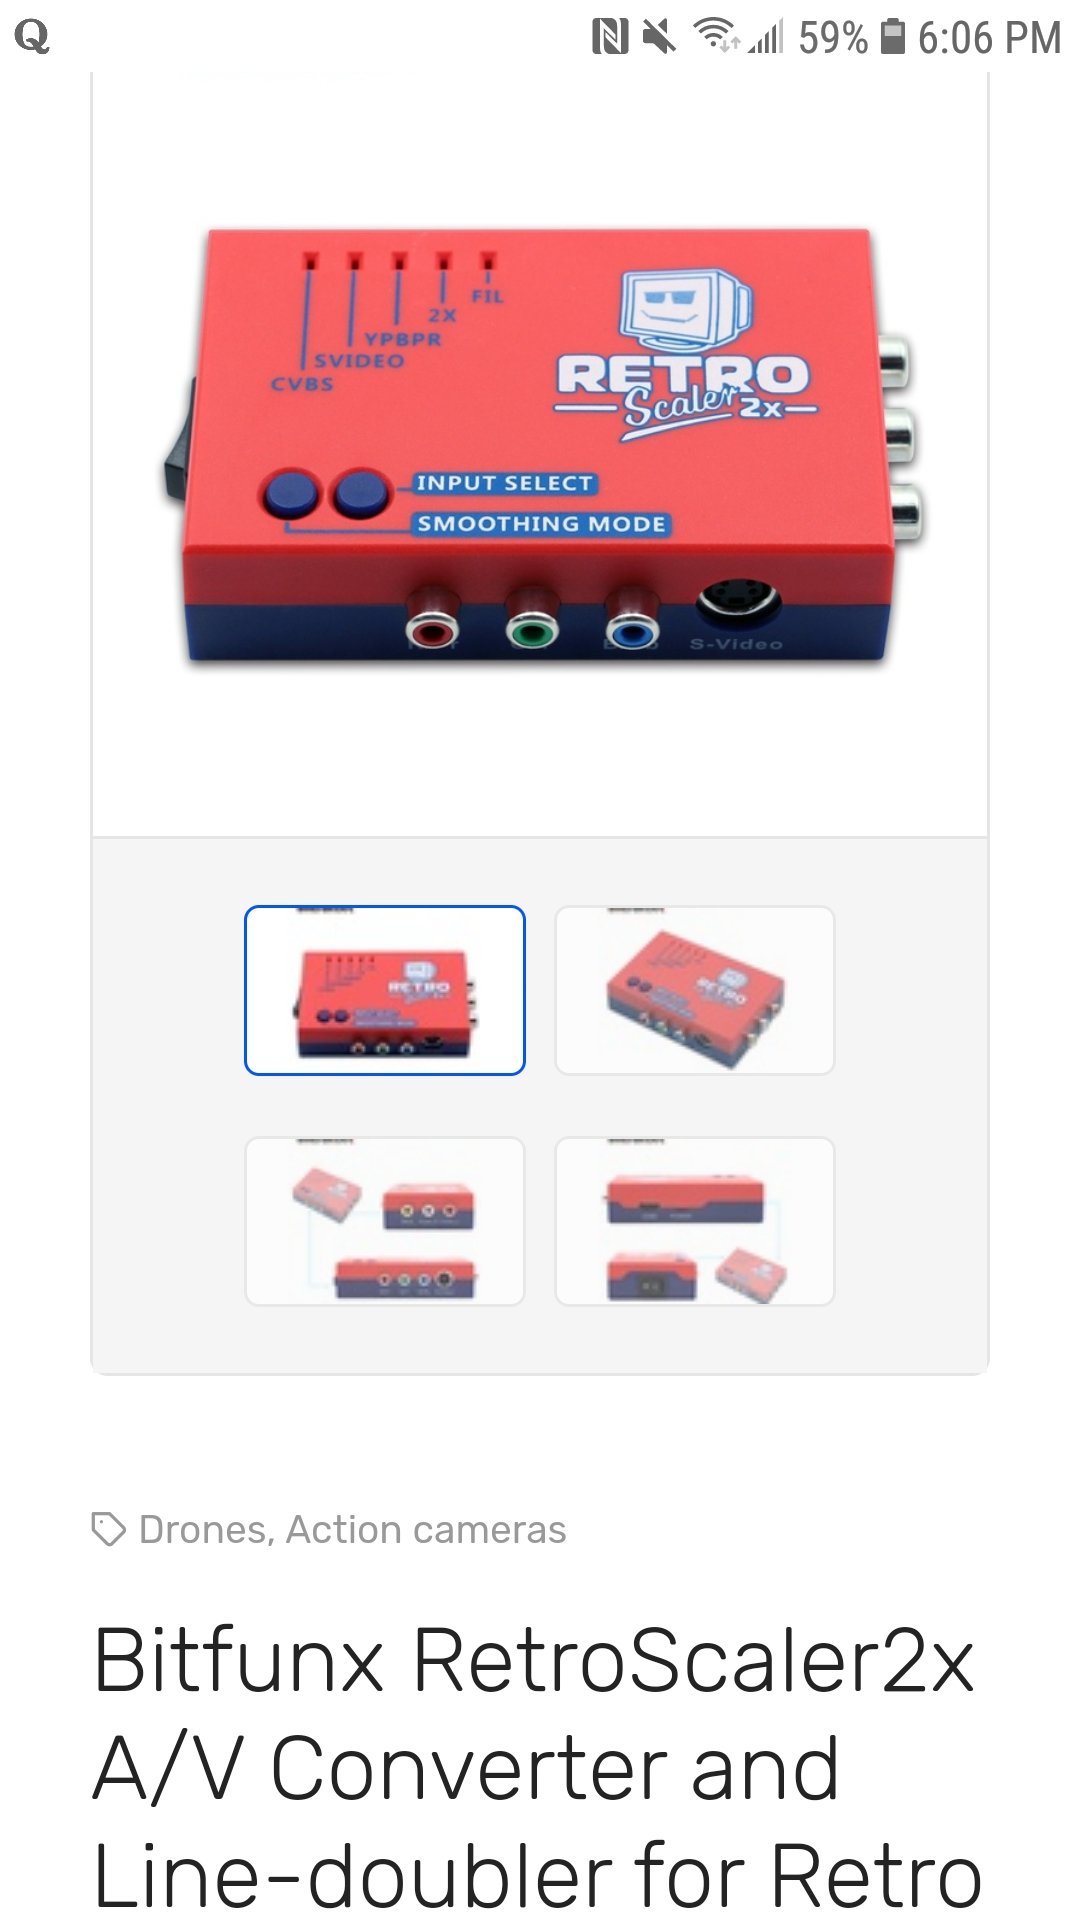 Bitfunx Retro Scaler 2x - Classic Console Discussion - AtariAge Forums